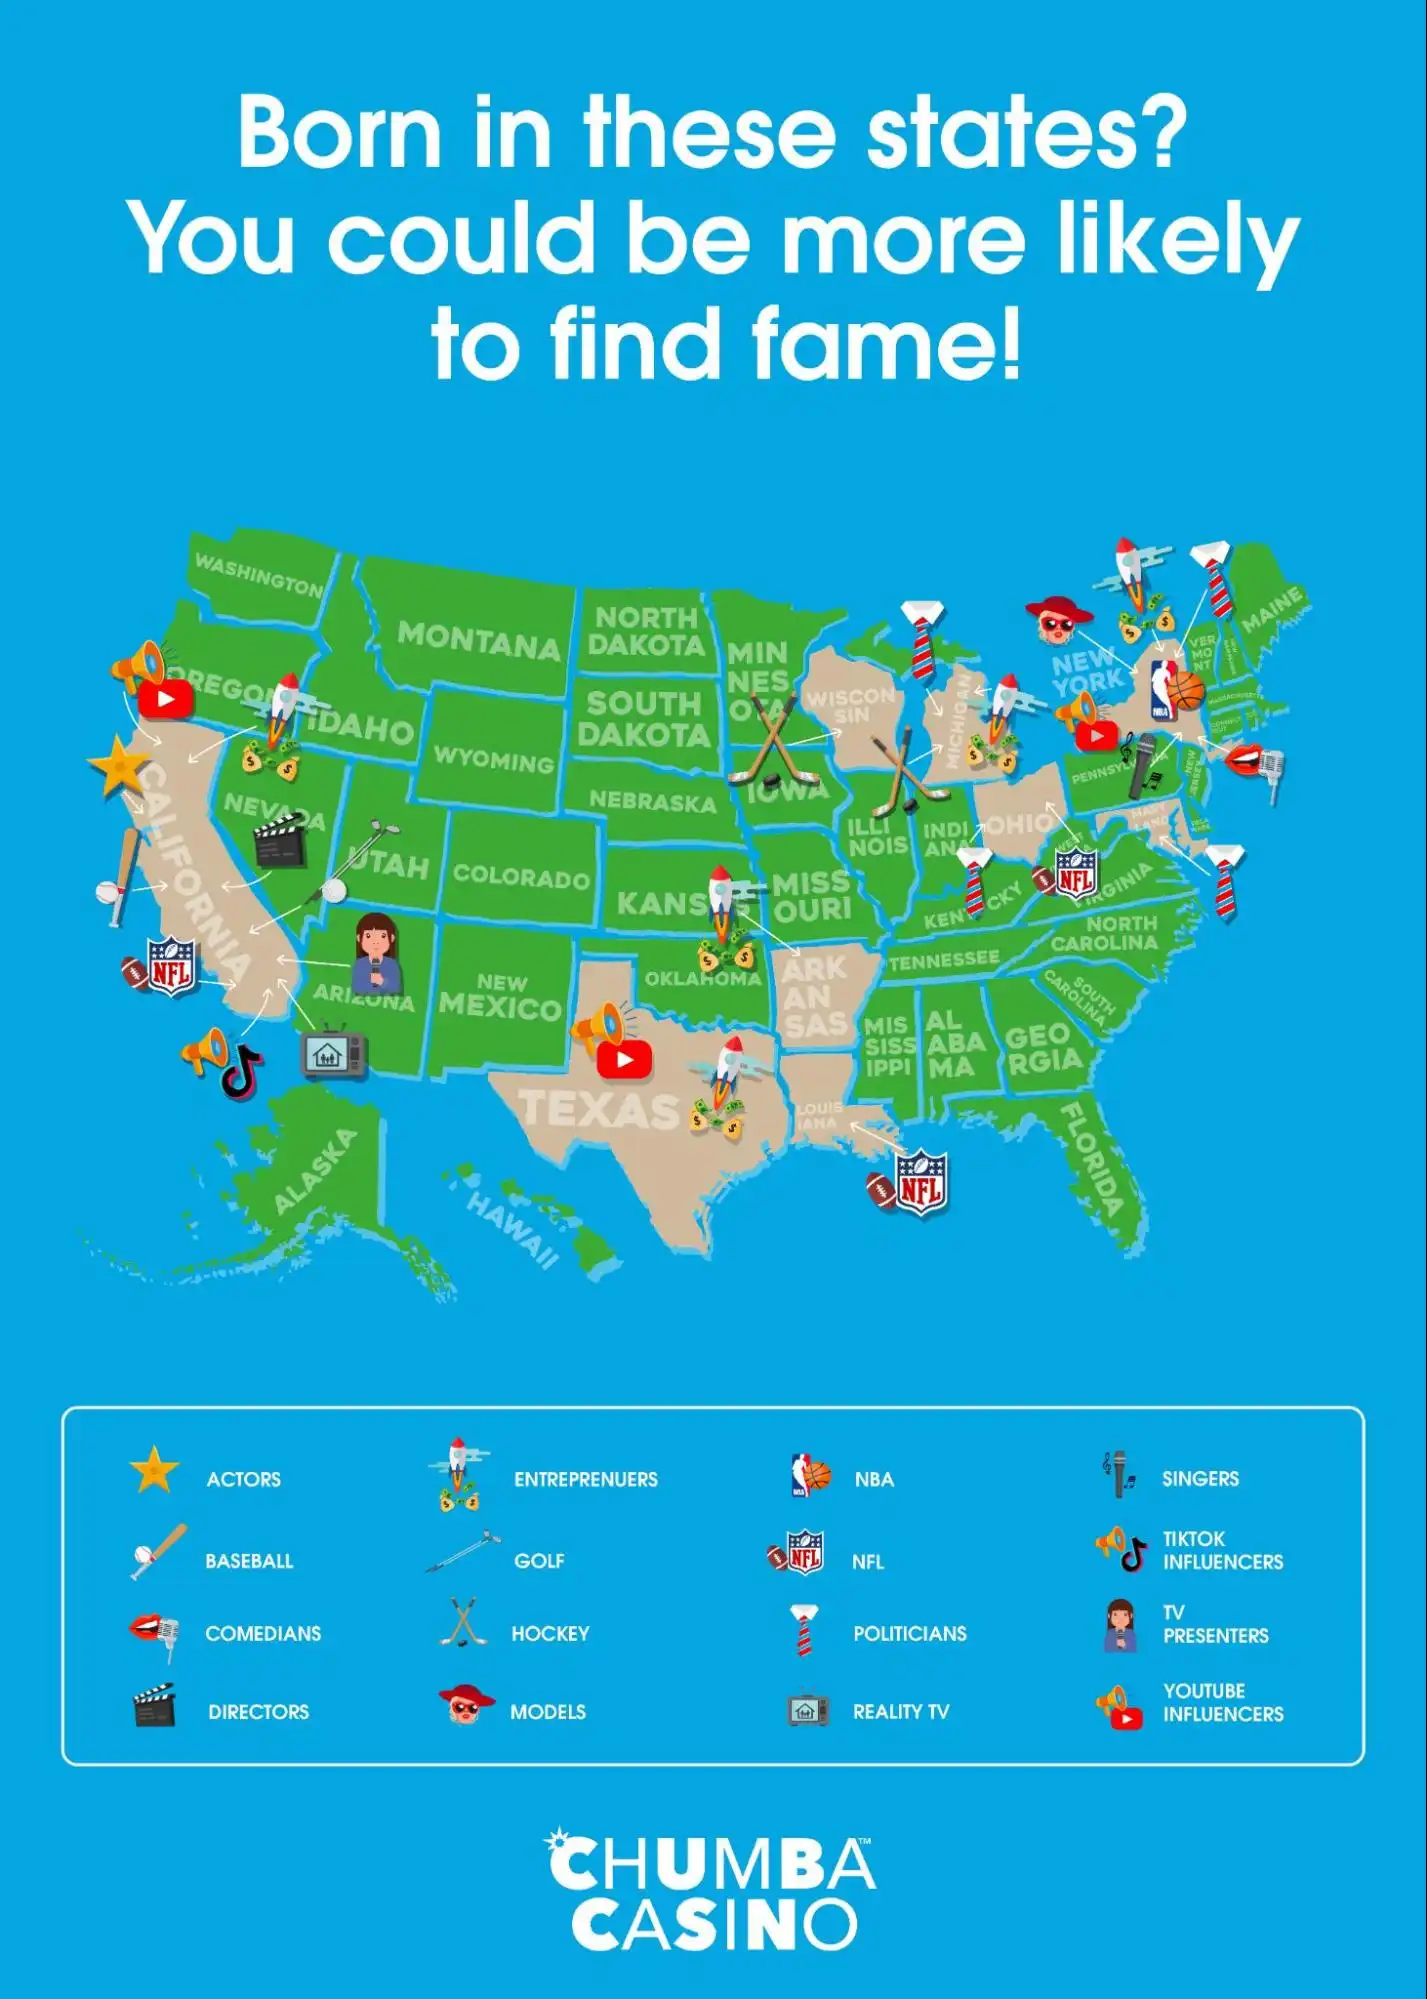 Born in these States infographic